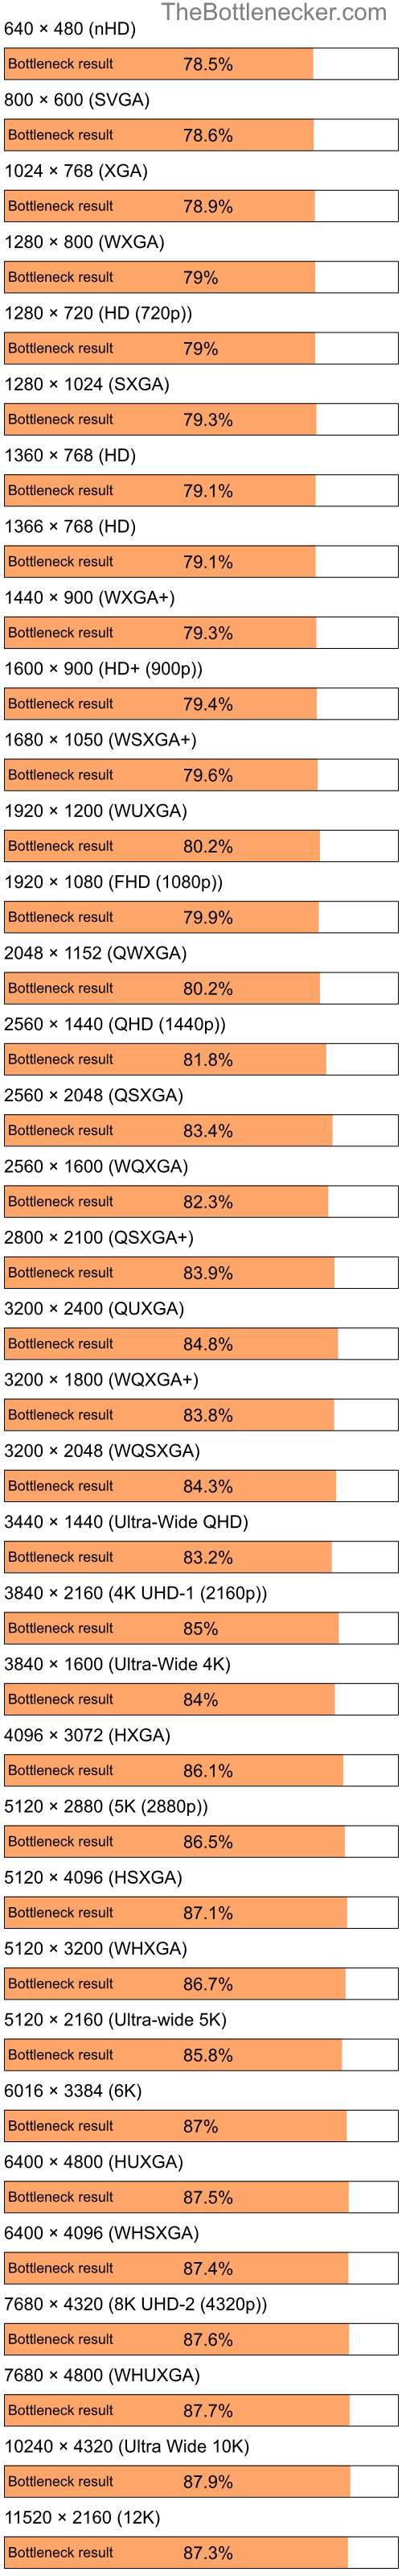 Bottleneck results by resolution for Intel Pentium 4 and NVIDIA GeForce Go 6100 in Processor Intense Tasks